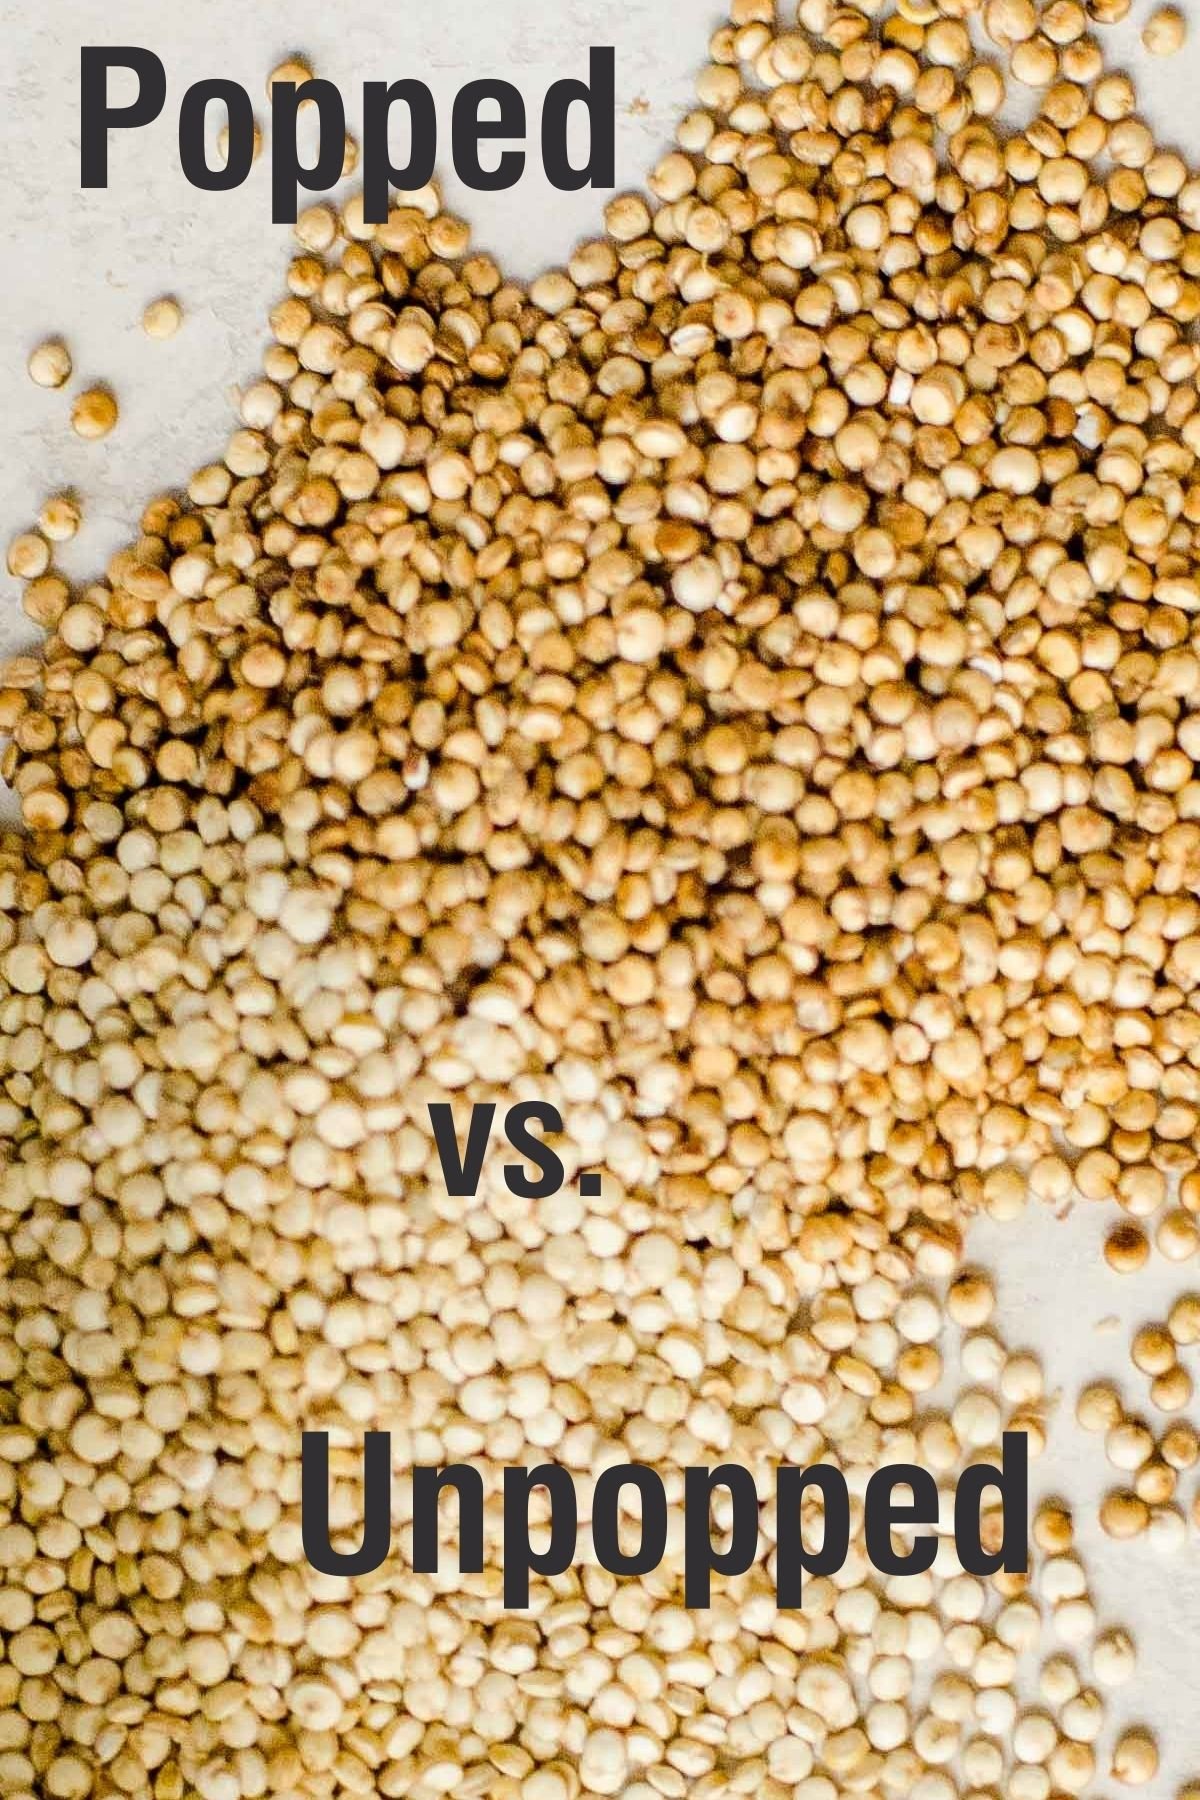 Side by side popped vs. unpopped quinoa showing toasty color.